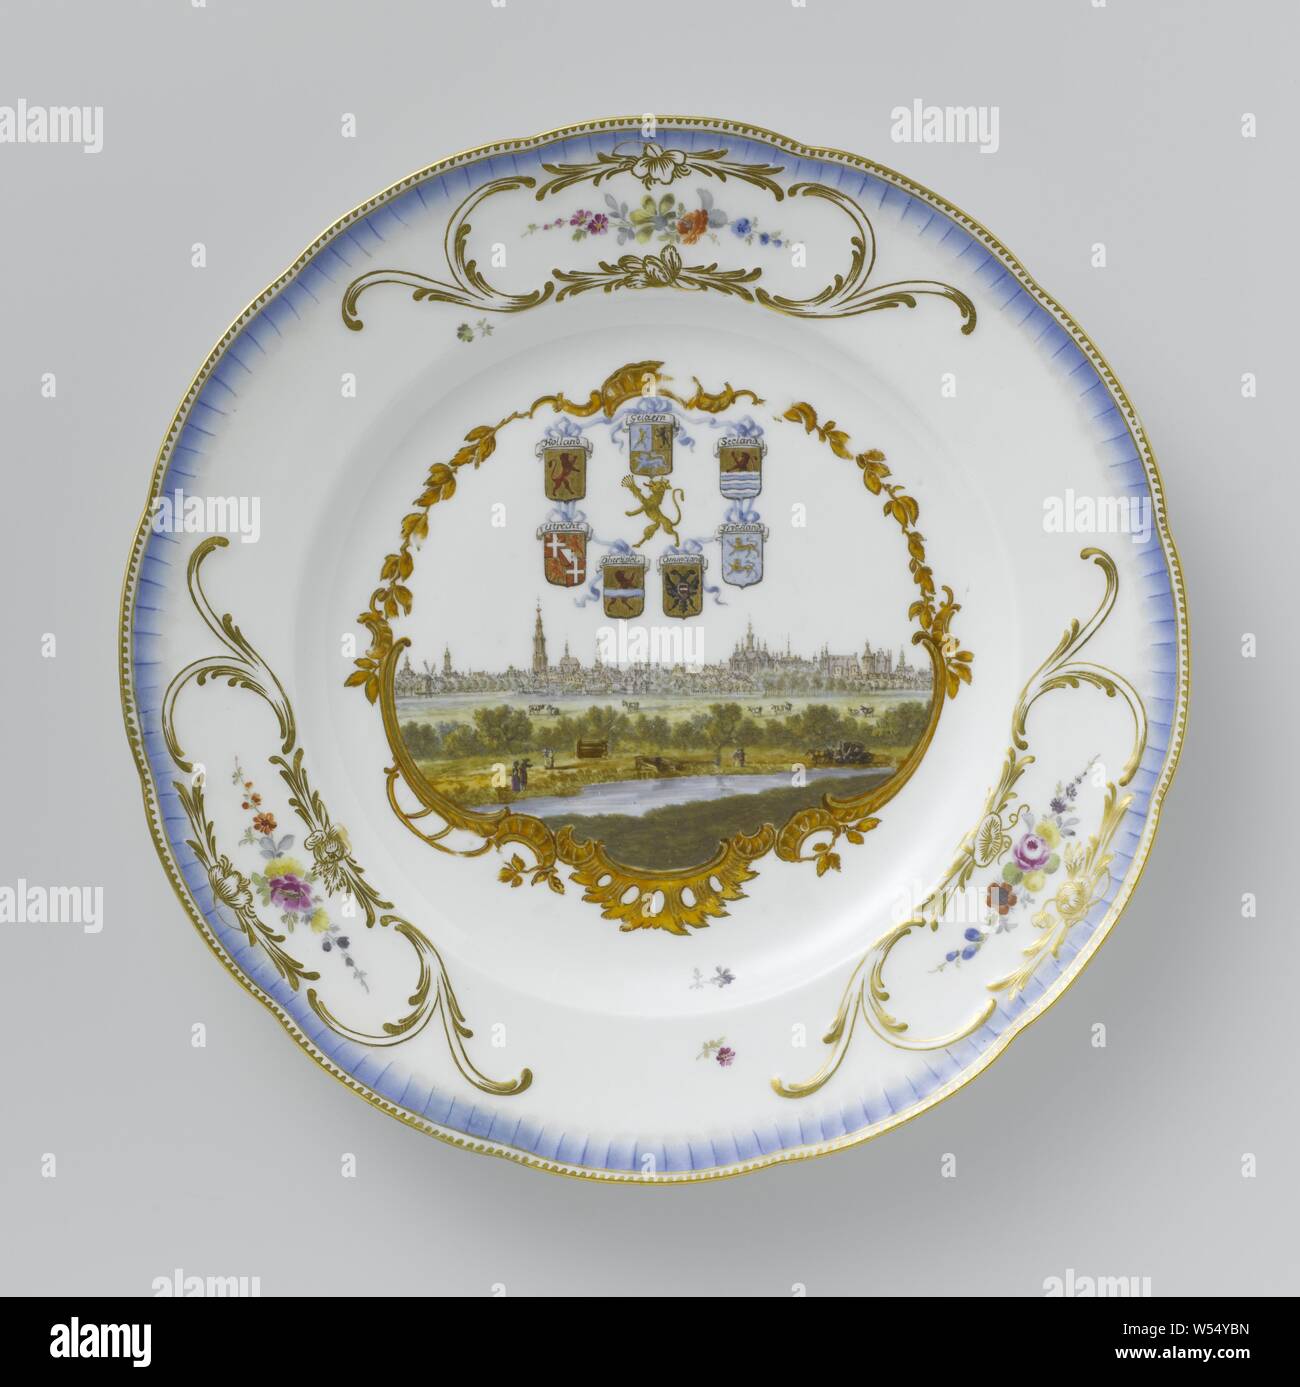 Seven plates from the service of Stadtholder William v Plate from the Stadtholder Service, with a view of The Hague and the seven coats of arms of the United Netherlands Plate from the stadholder's service, multicolored painted with a face on it The Hague and the seven arms of the United Netherlands, Round plate of painted porcelain. The border is scalloped and has three cartouches embossed with gold, including a multi-colored flower garland. A blue, ribbed piping runs along the edge. The mirror is painted with a rocaille cartouche with a topographic face inside, described on the back as' 'The Stock Photo